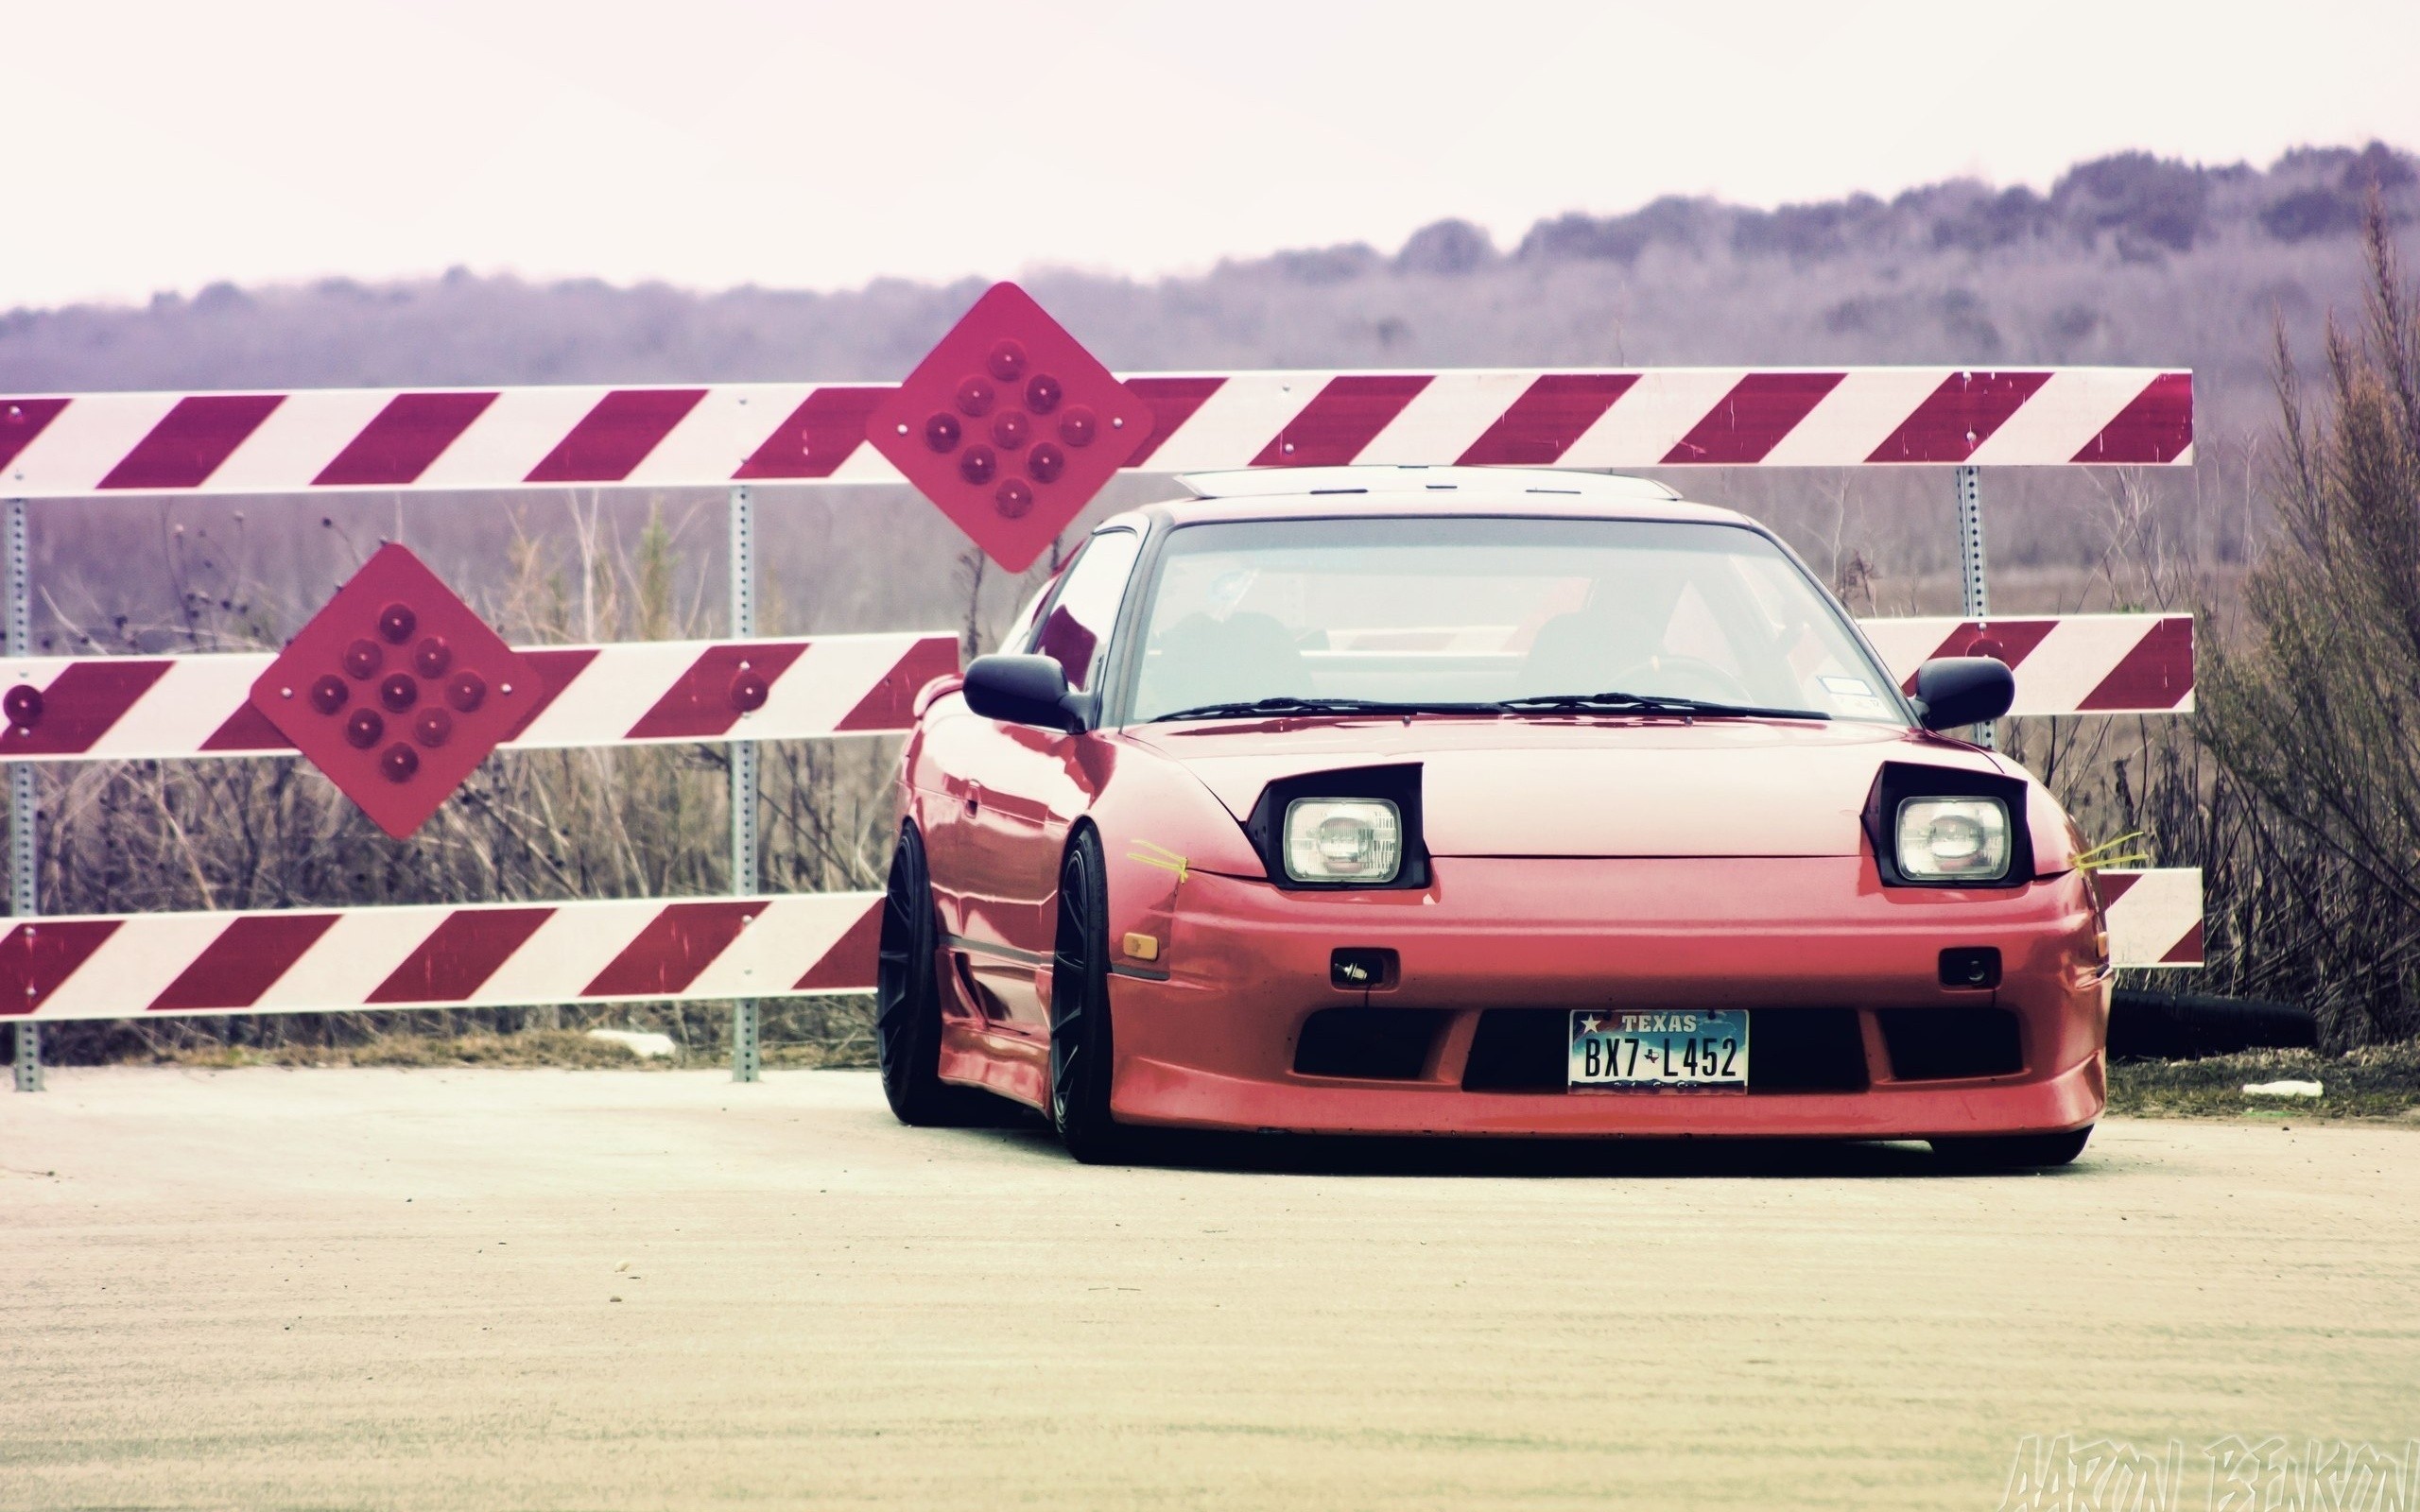 2560x1600 Search Results for “jdm wallpaper nissan” – Adorable Wallpapers